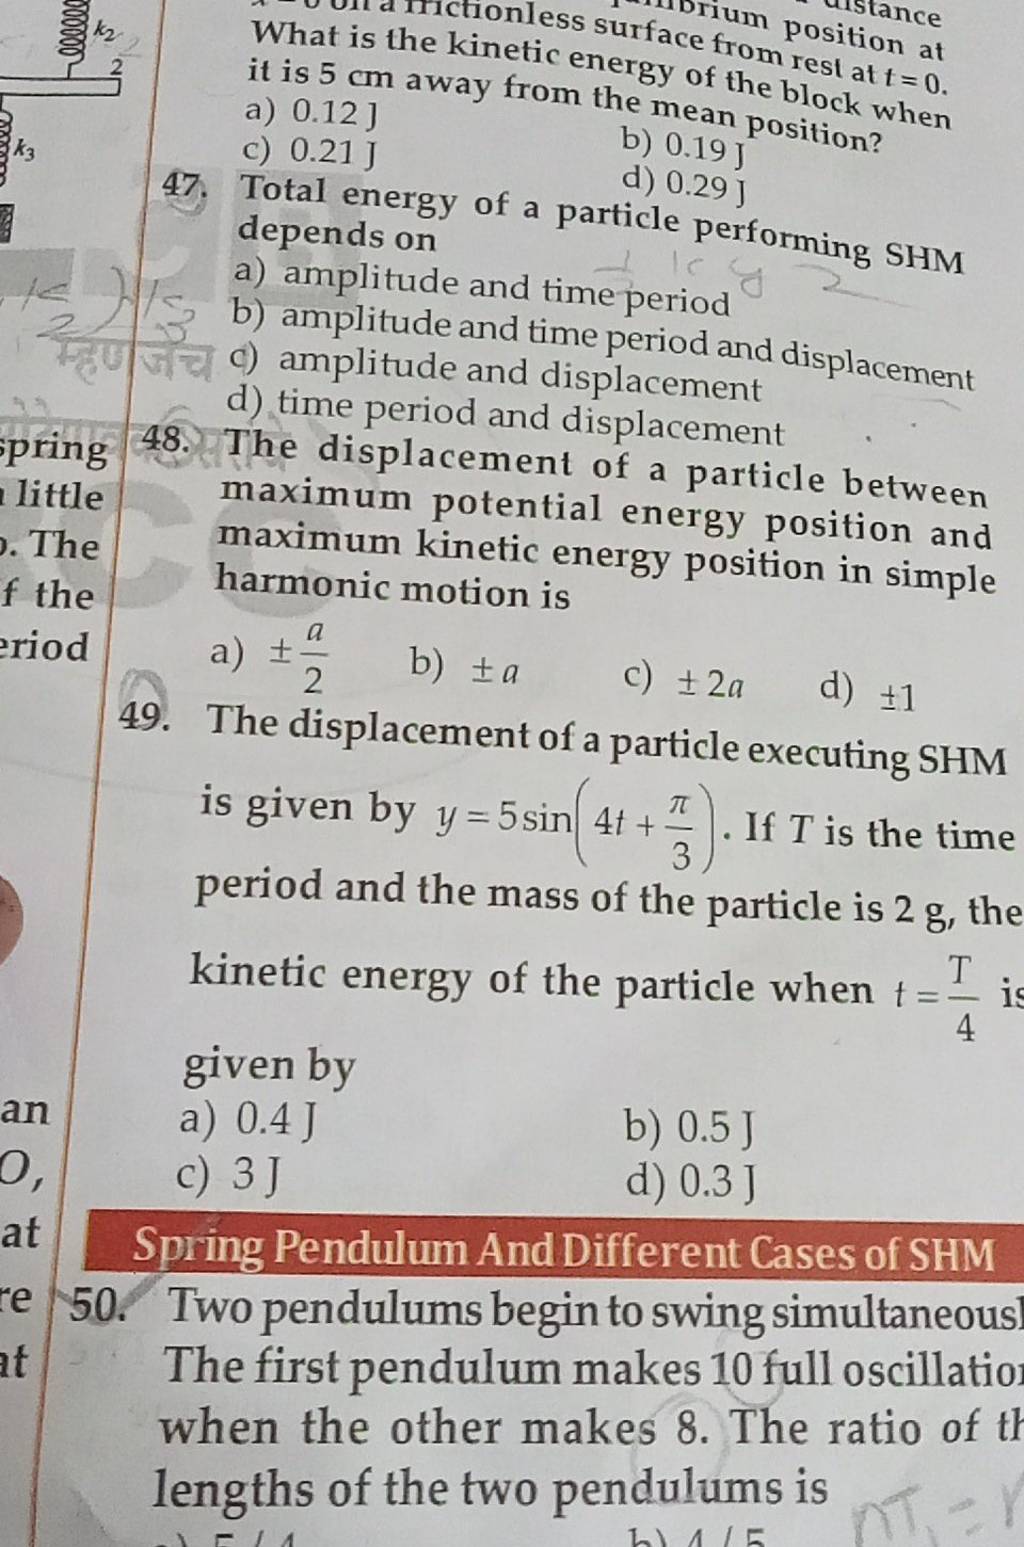 The displacement of a particle between maximum potential energy positi